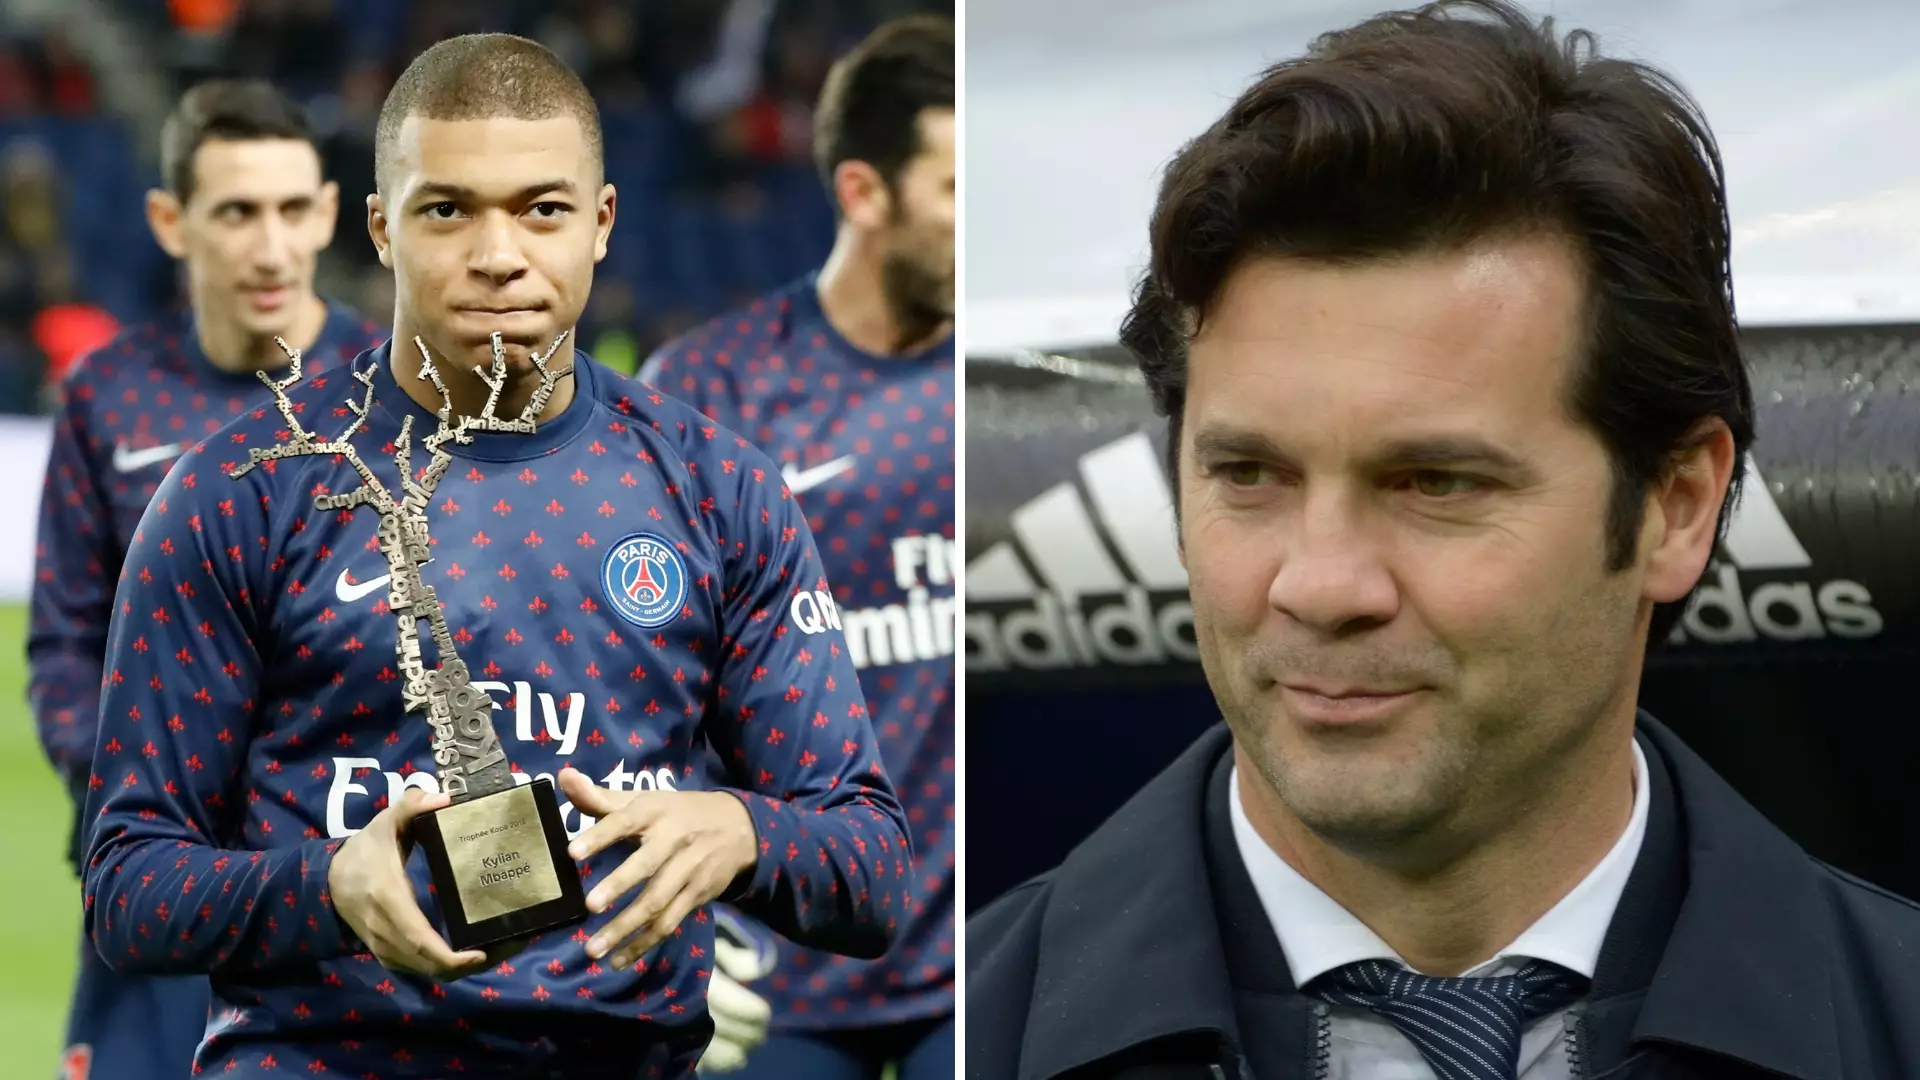 Kylian Mbappe Gives Interesting Response After Reporter Asks About Potential Real Madrid Move